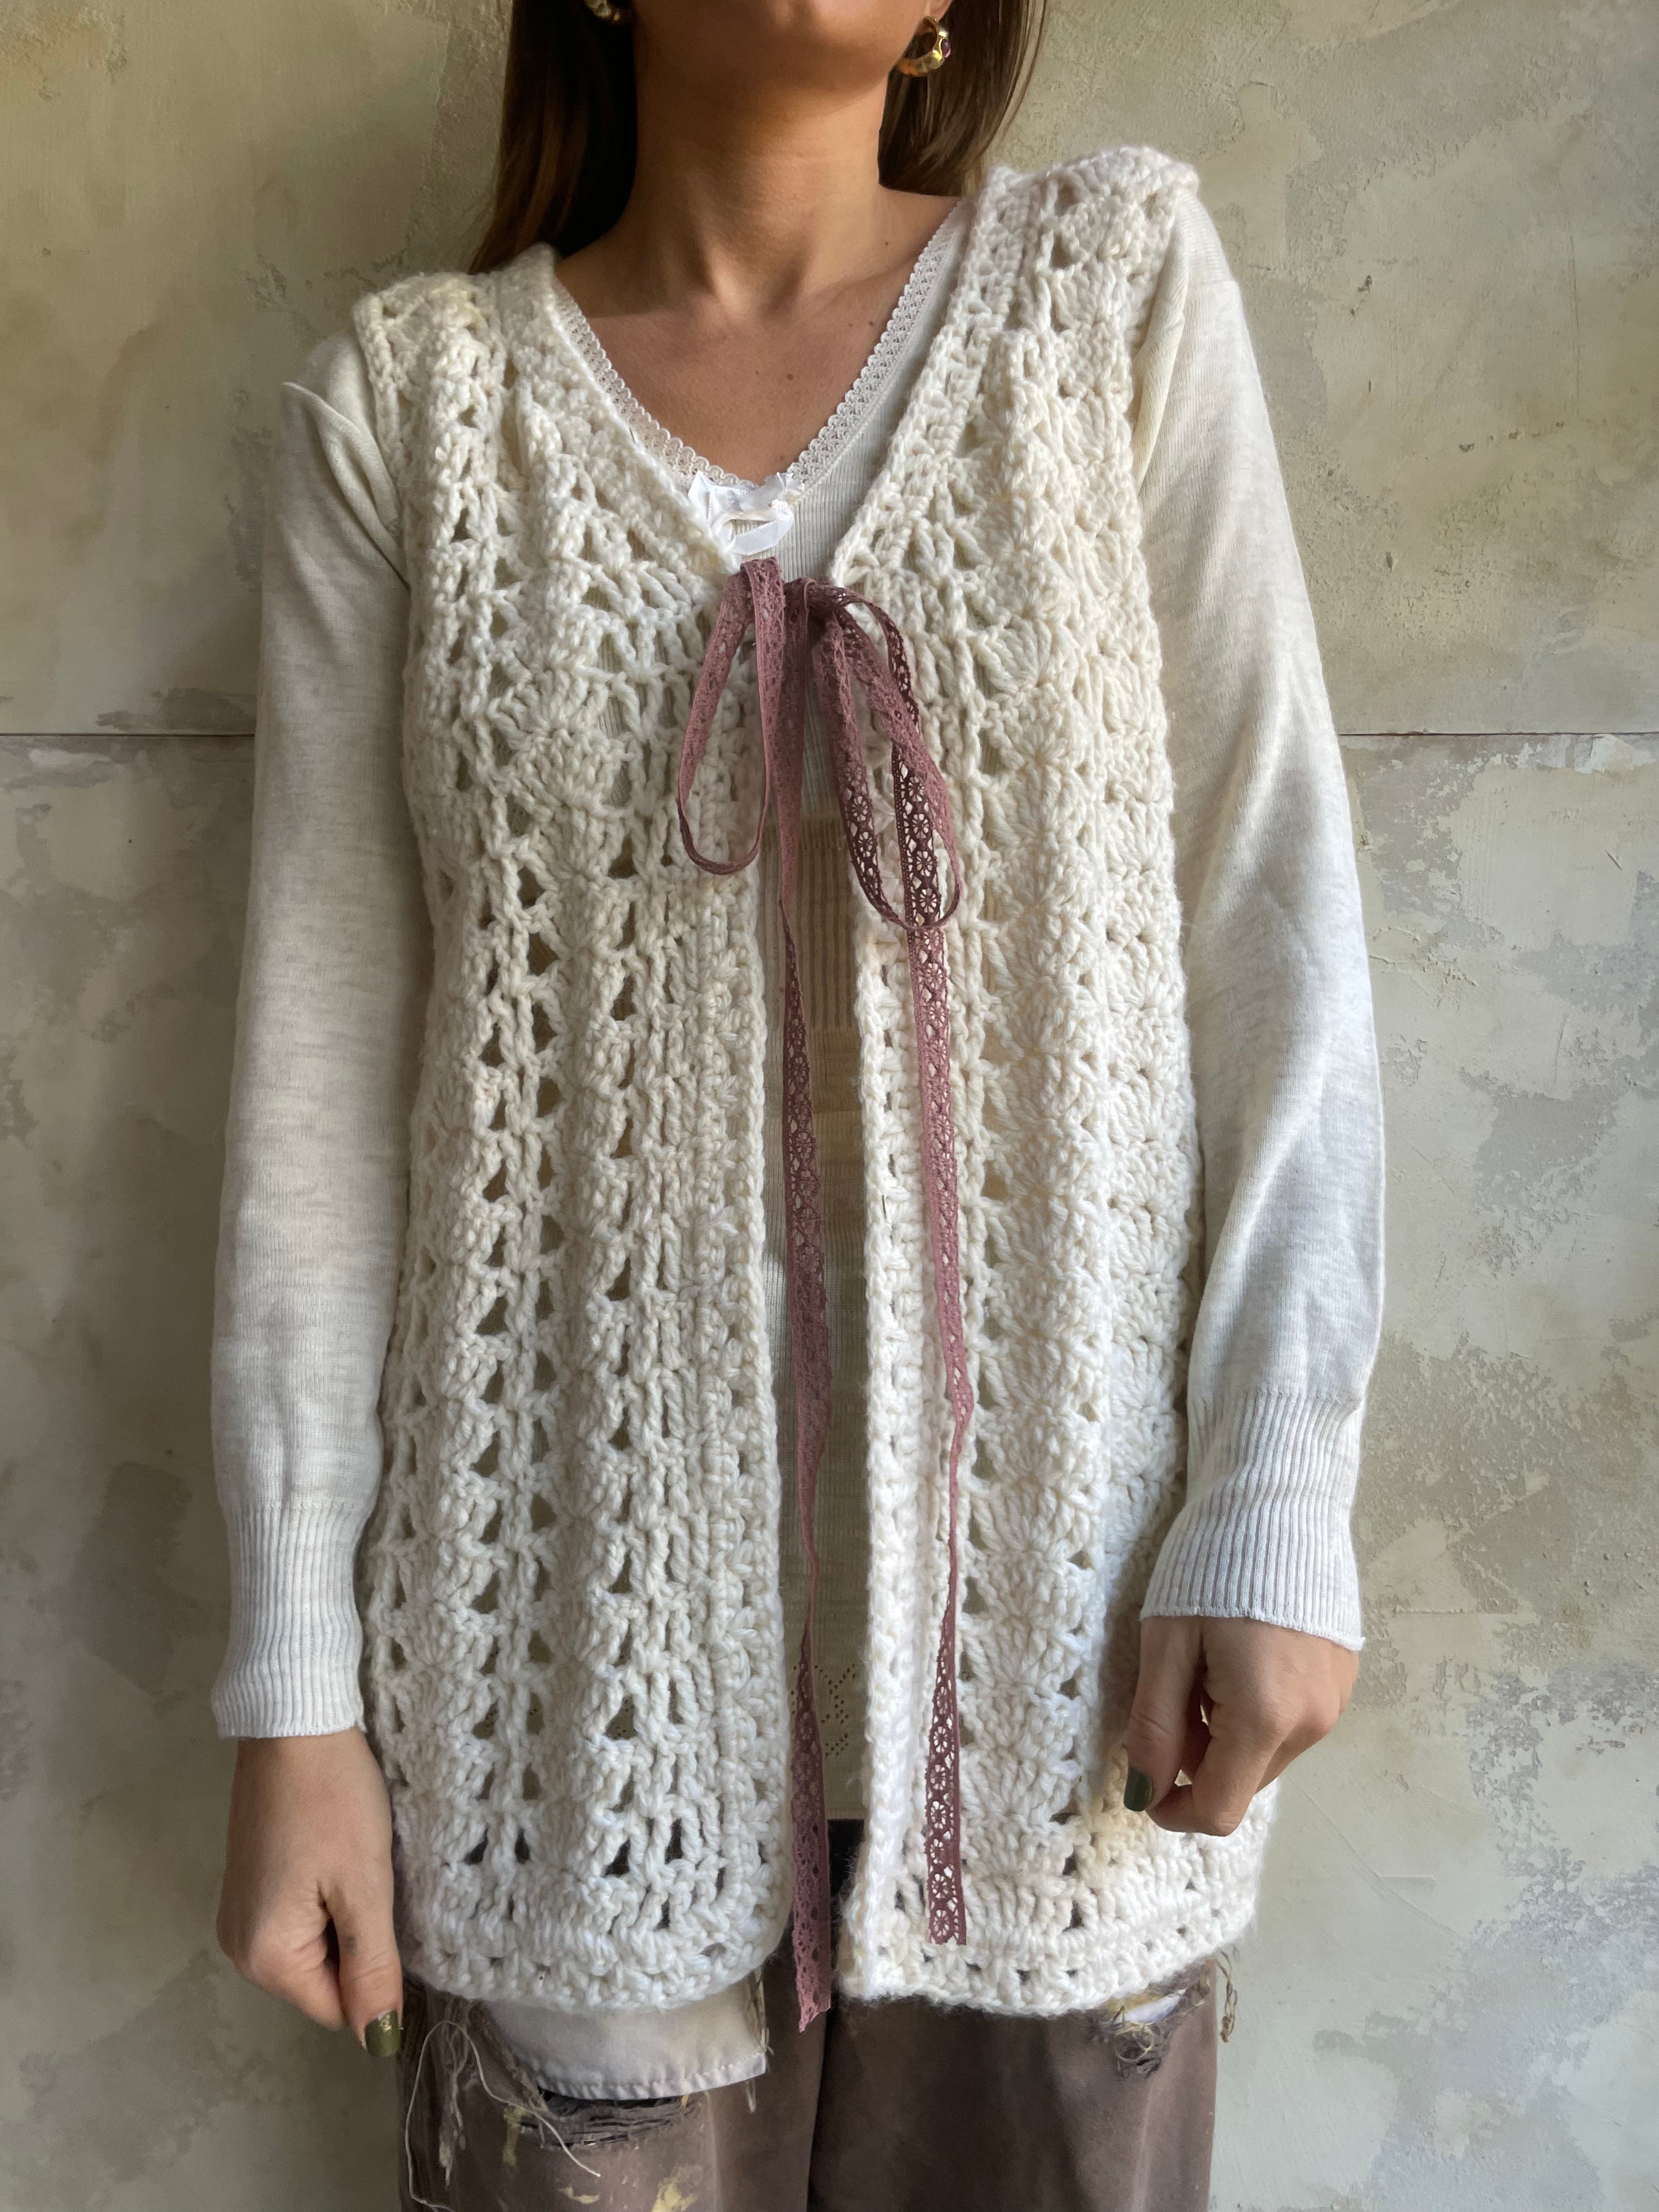 Crochet Vest with Bow